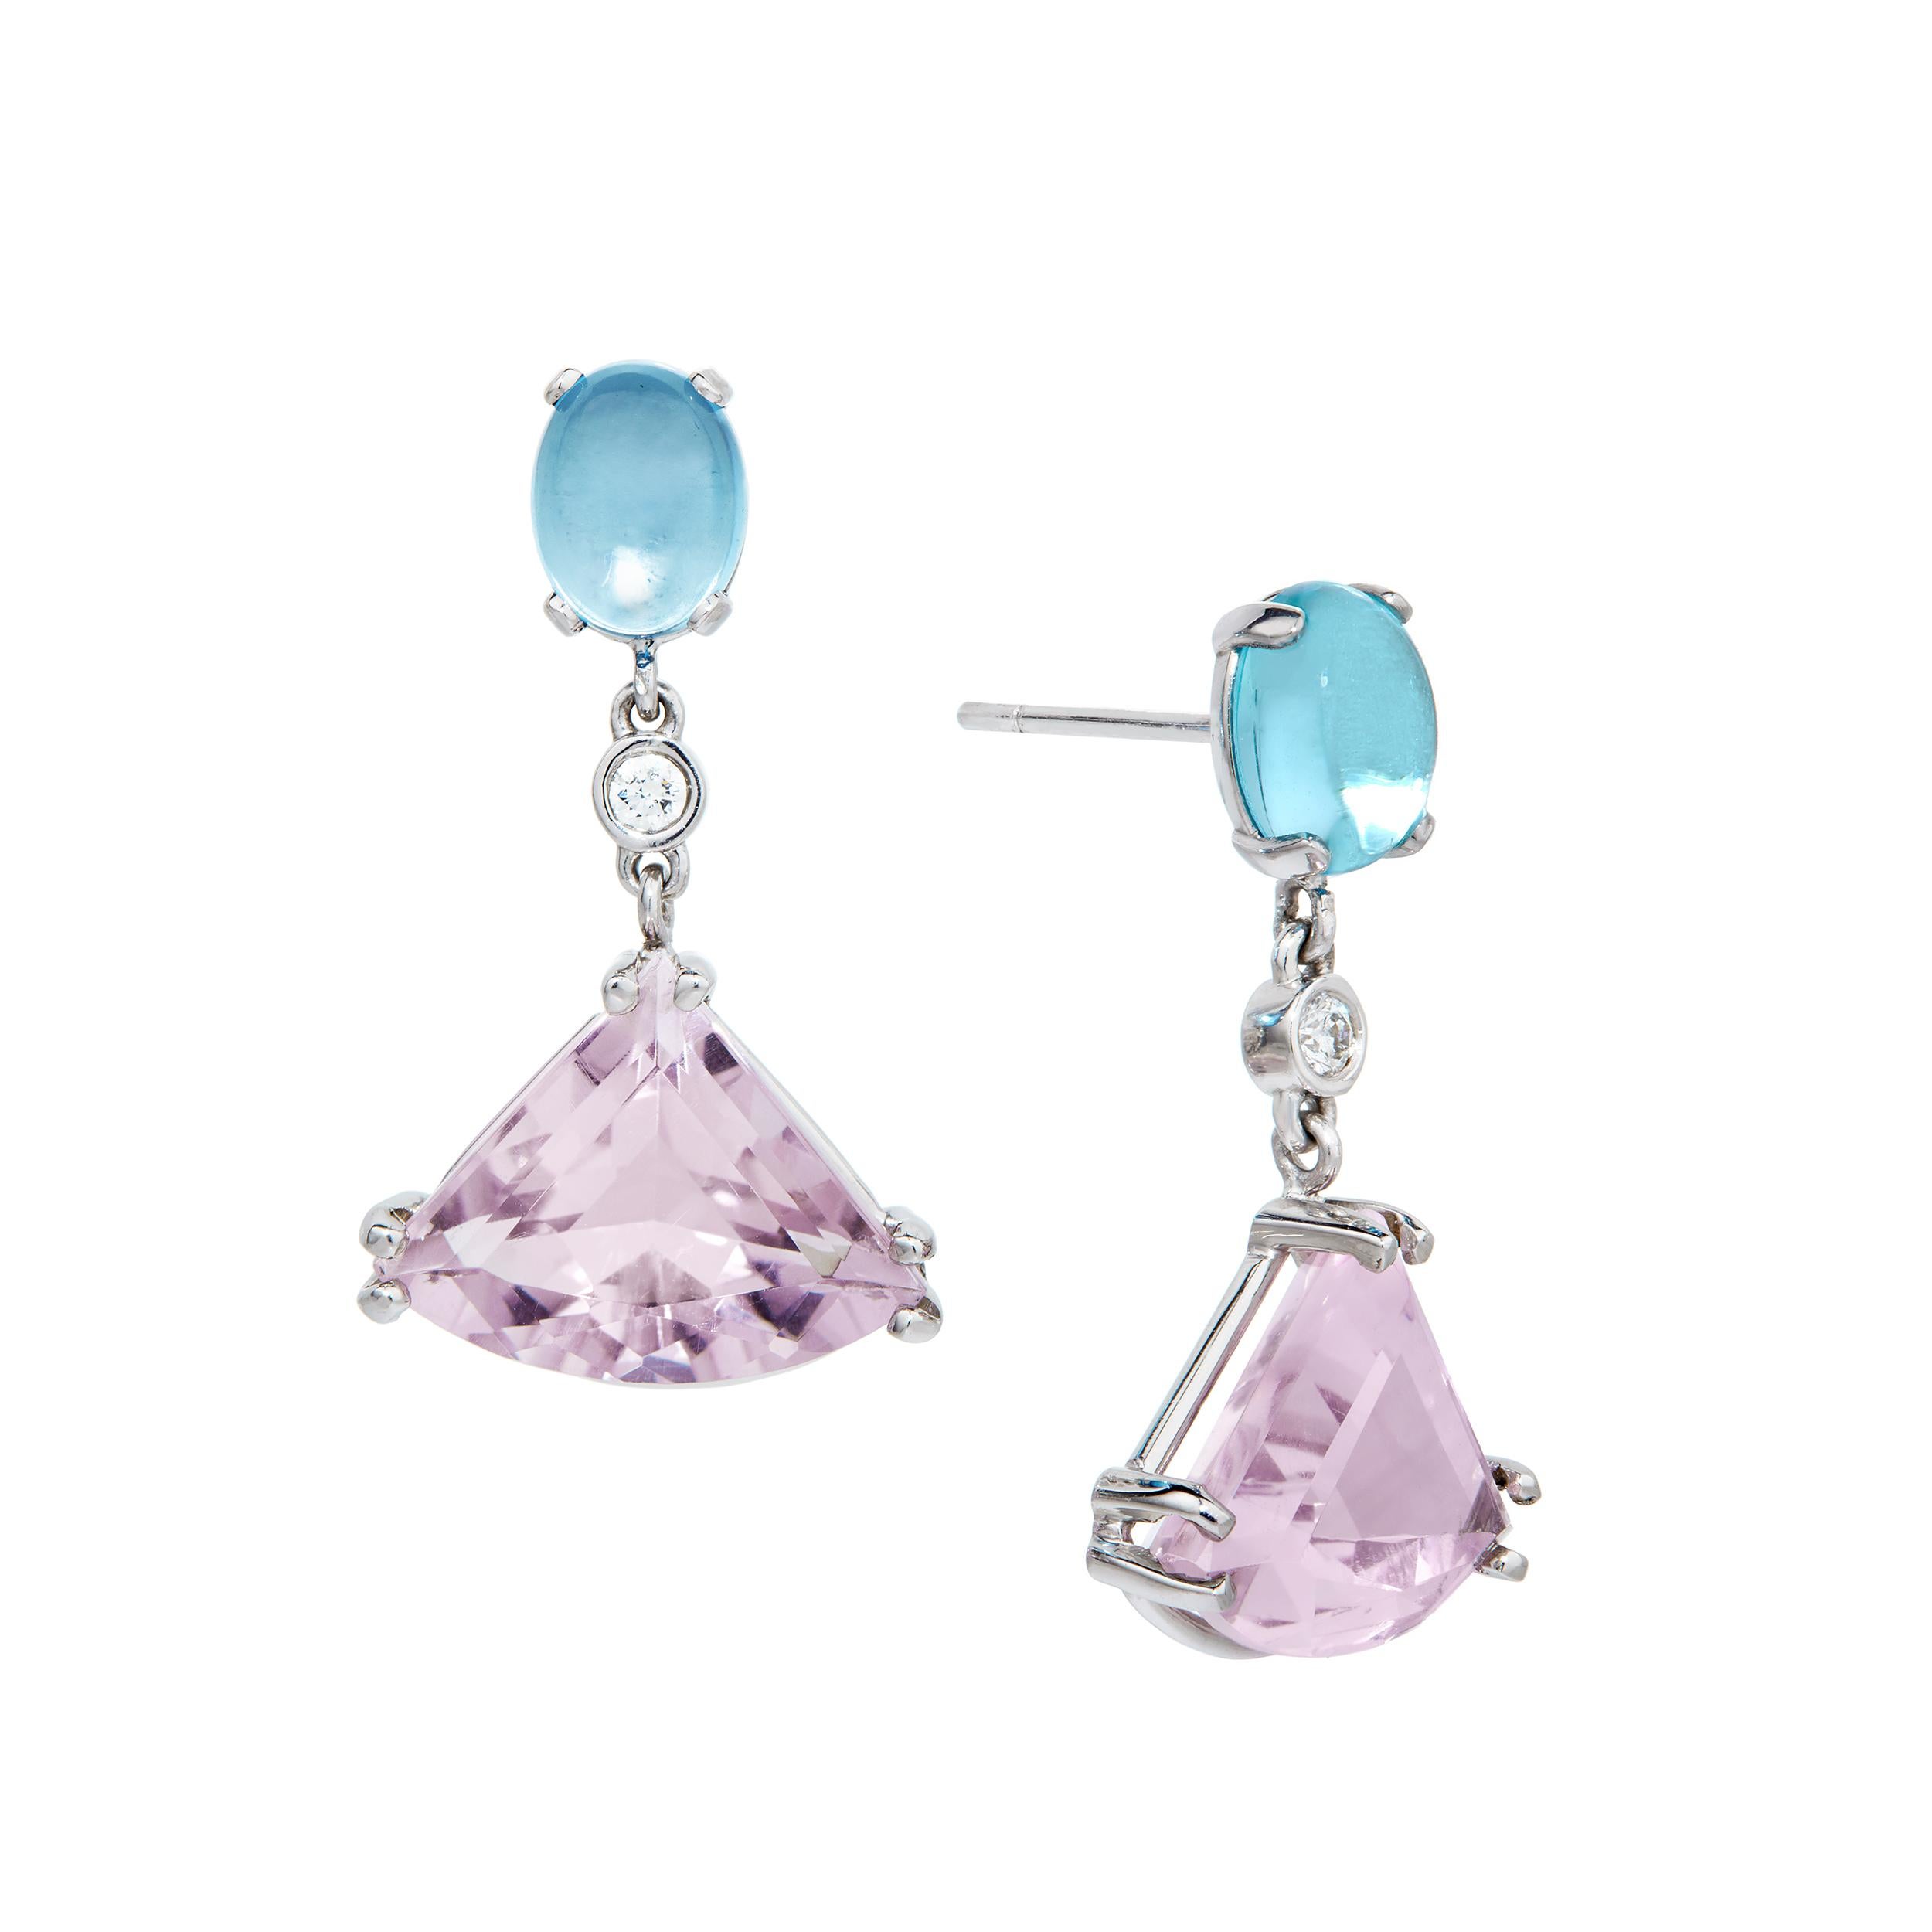 Amethyst, Topaz and Diamond Earrings in Platinum	
     Matched Blue Topaz	Weighing:  2.76 Carats
     Matched Amethyst Weighing:  10.55 Carats
     Diamonds Weight:  0.16 Carats

Total Gem Weight:  10.71 Carats

Length:  1